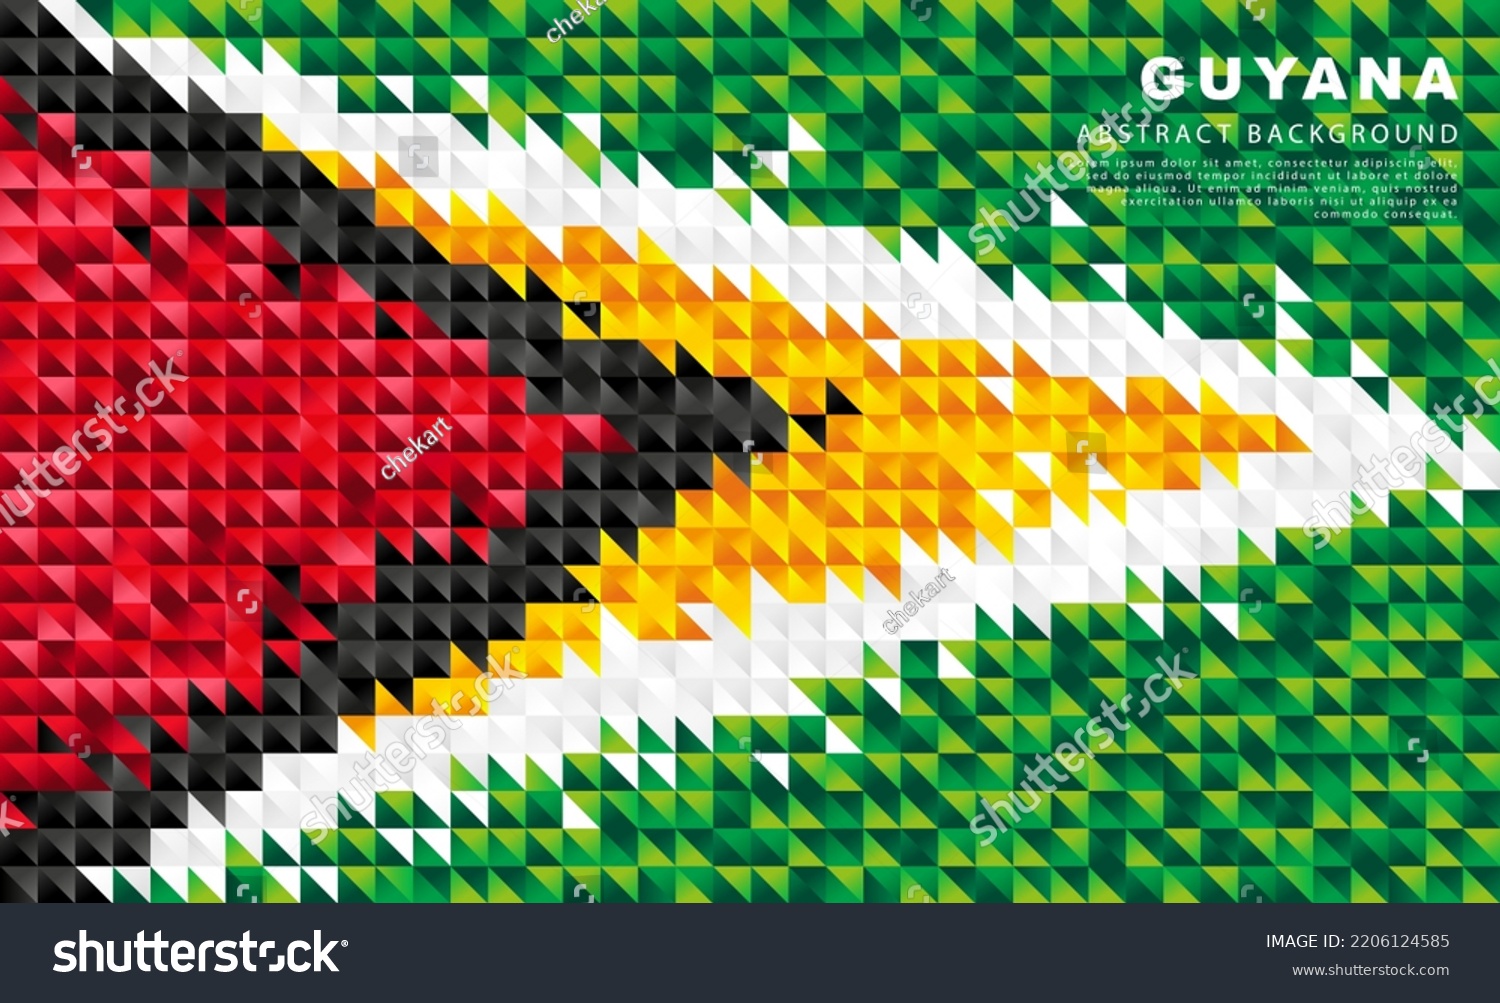 SVG of Flag of Guyana. Abstract background of small triangles in the form of colorful green, white, black, red and yellow stripes of the Guyanese flag. Vector illustration. svg